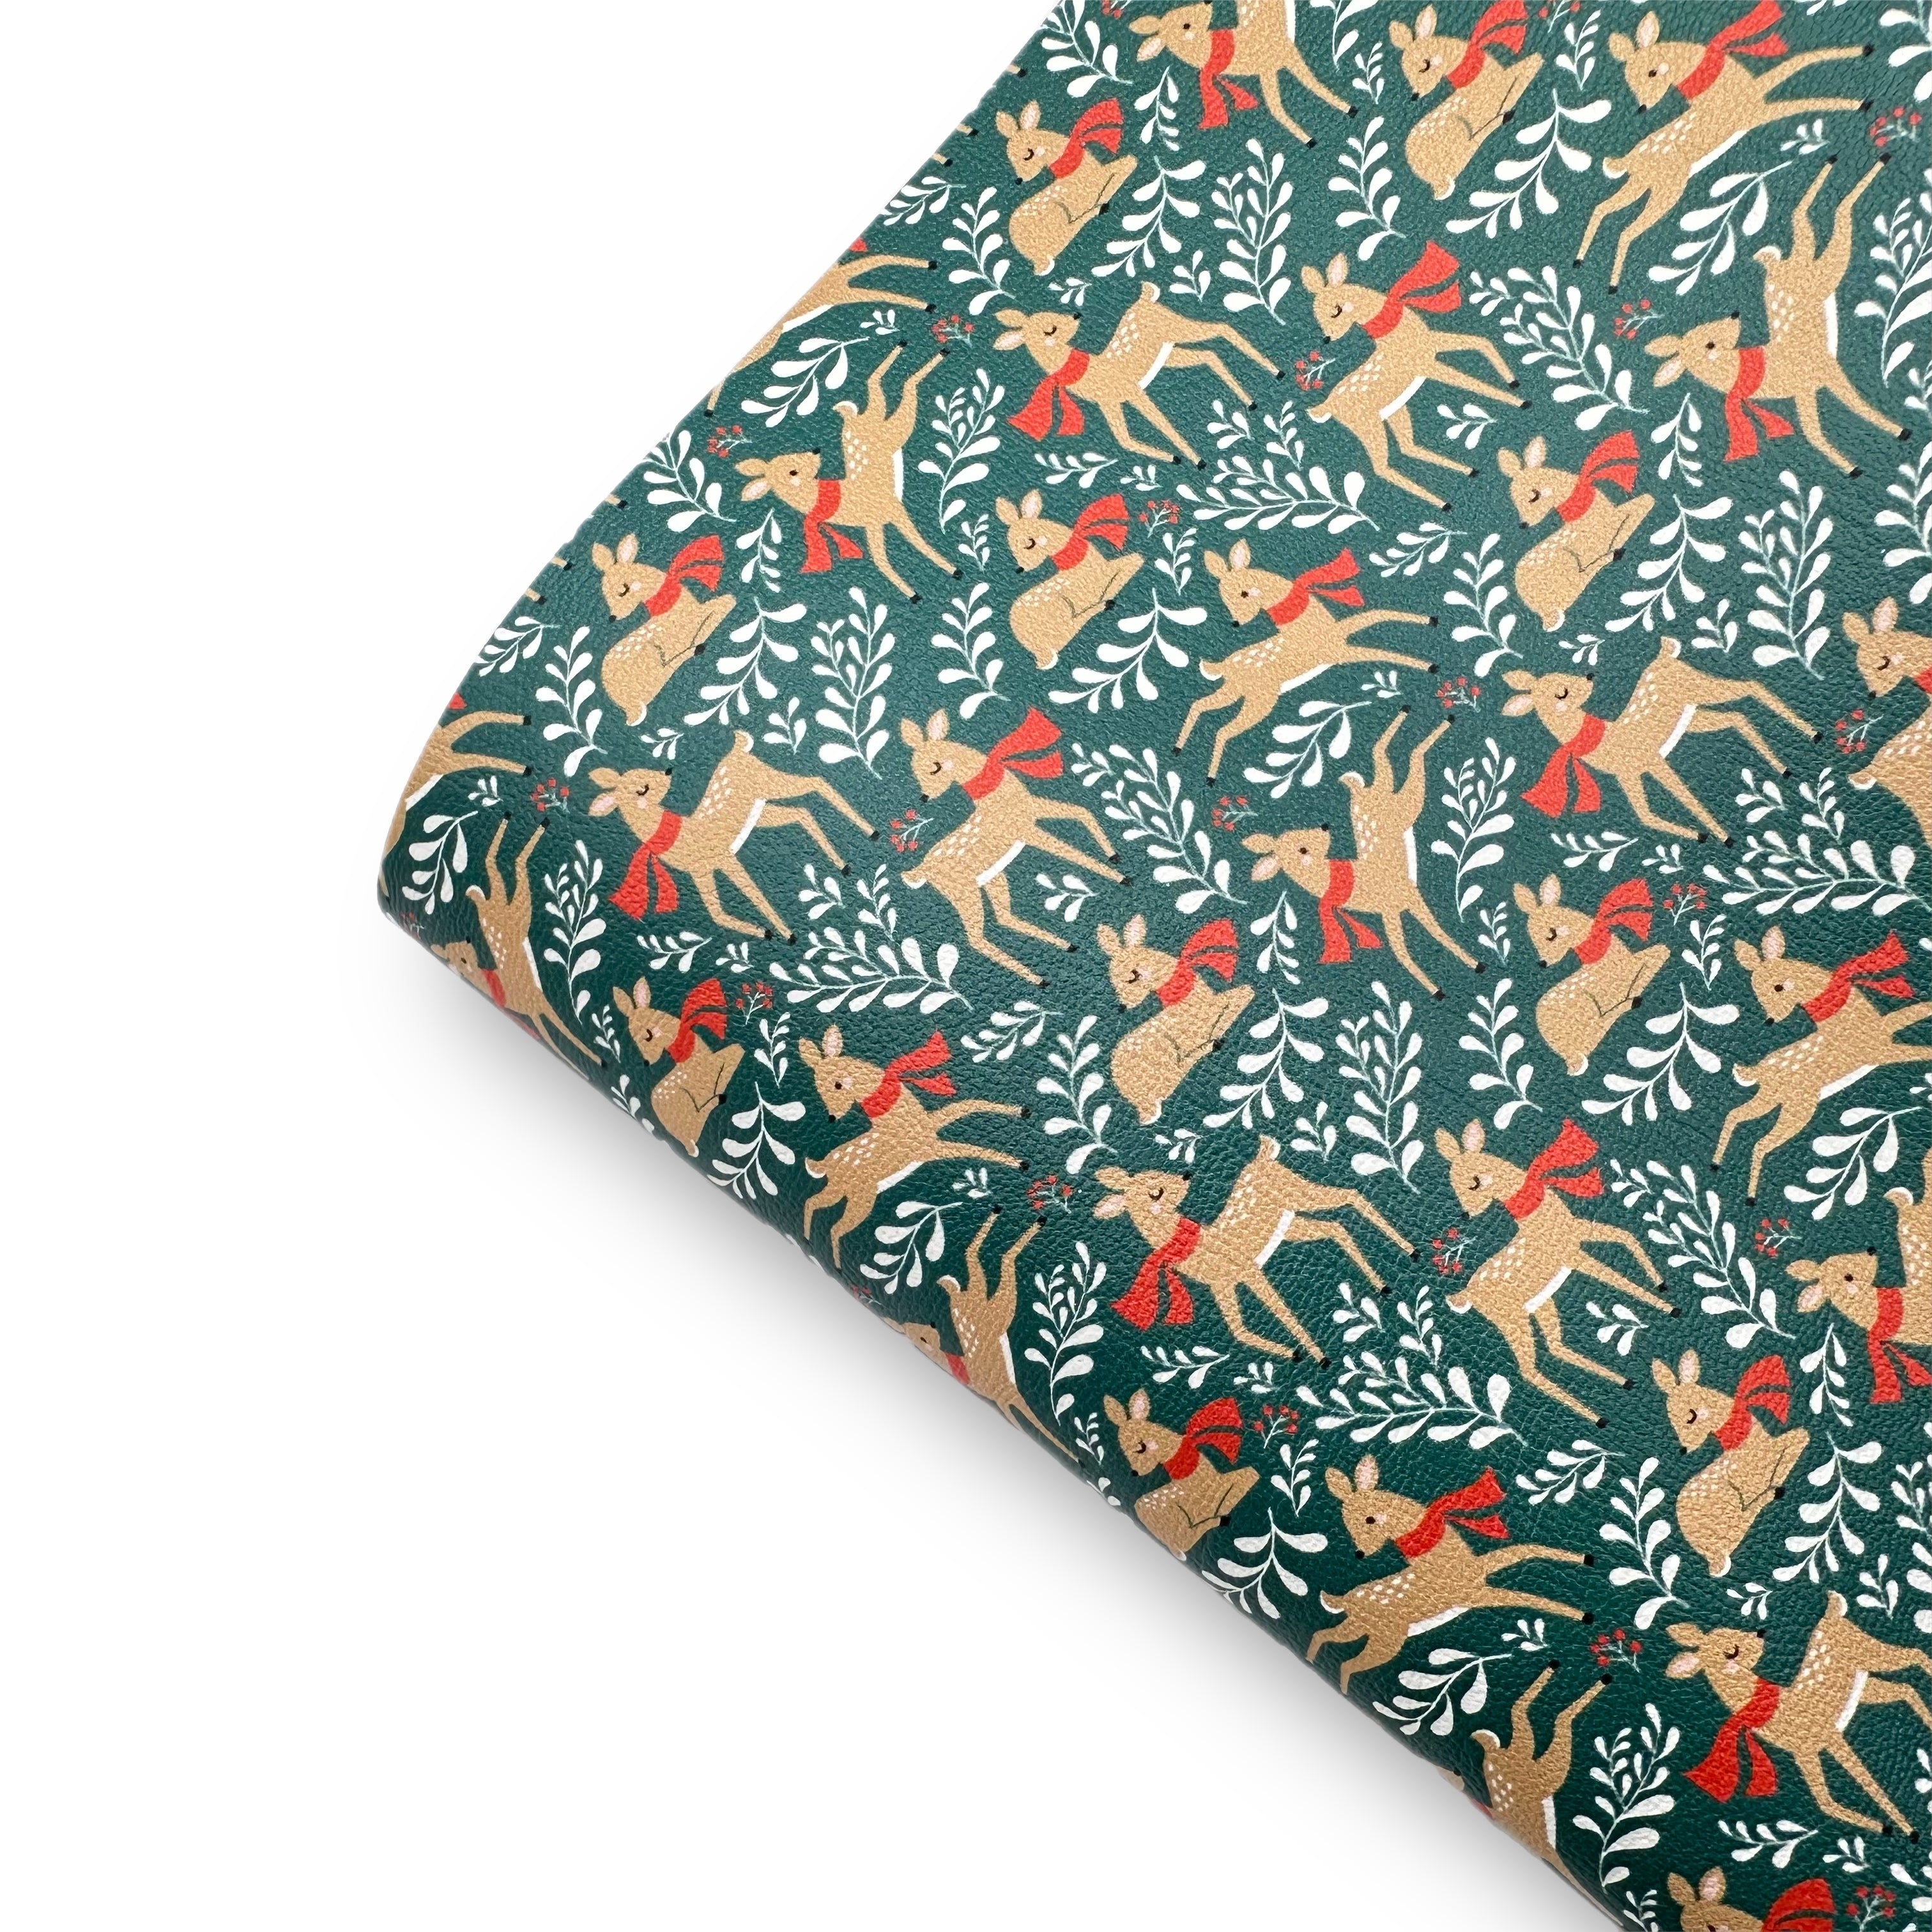 Mummys Little Deer Premium Faux Leather Fabric Sheets